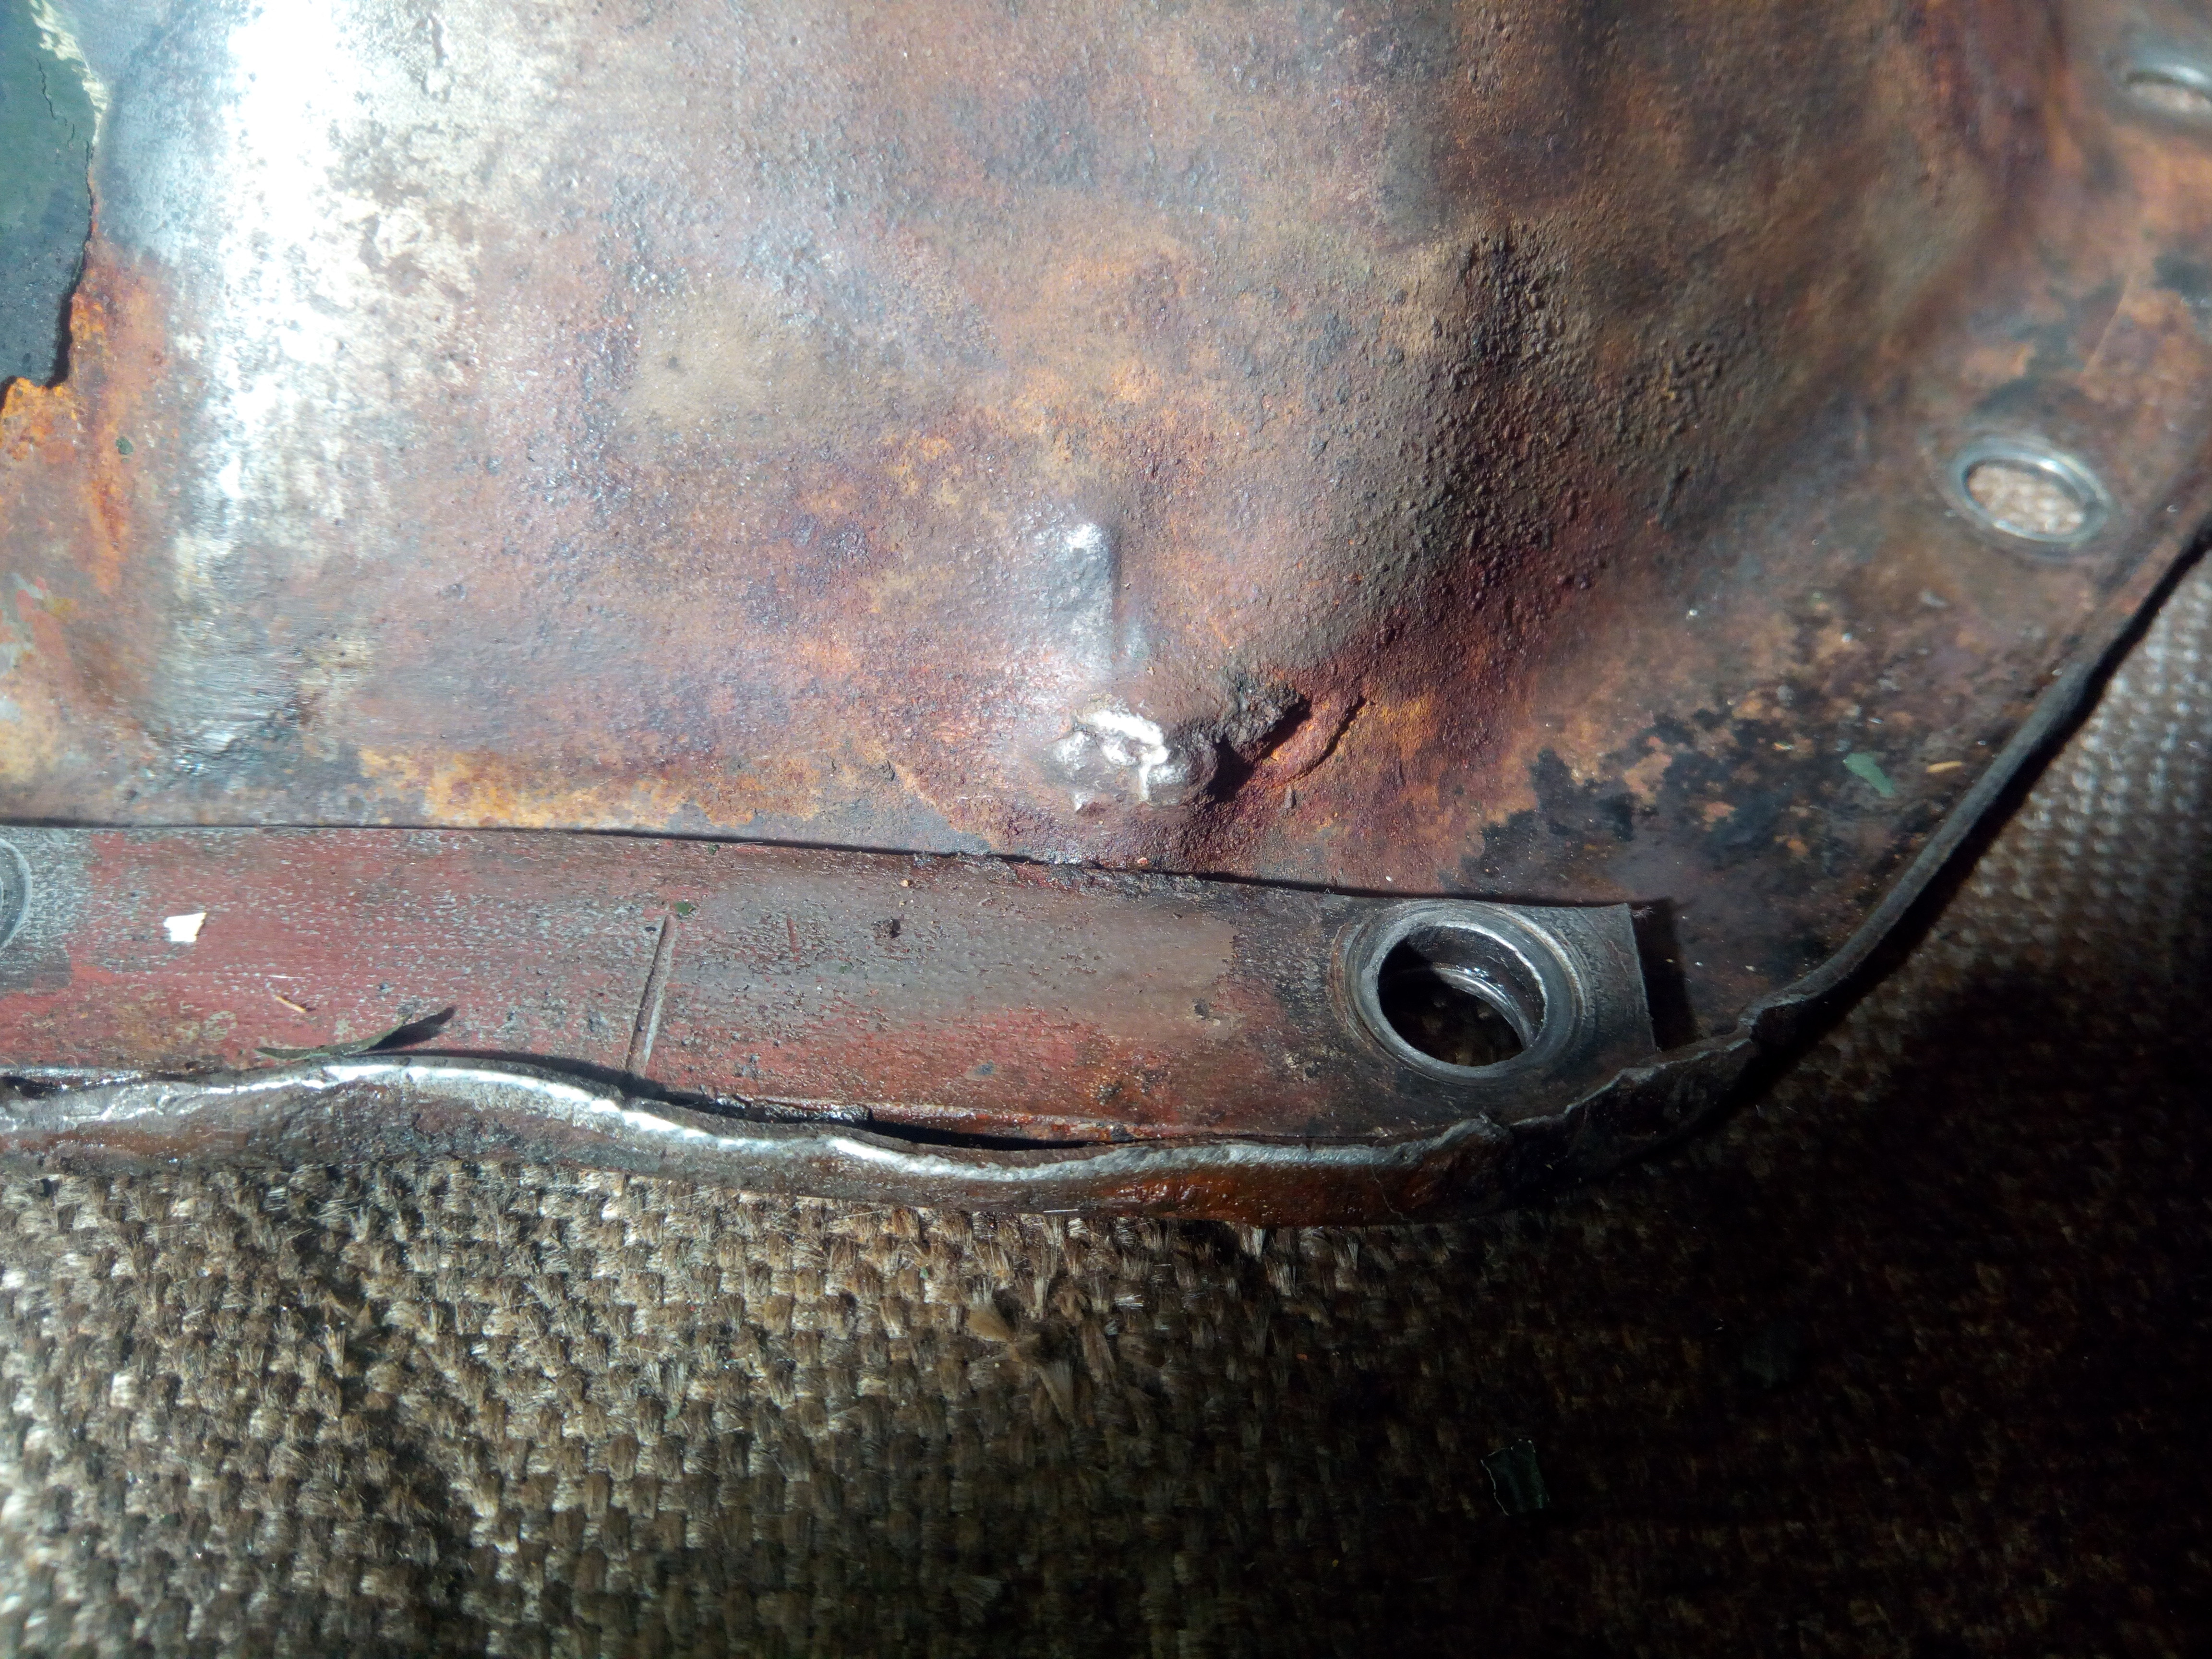 Repaired corner of the diff cover from the outside, with a
definite outwards lump, as if something has been driven into the cover
from the inside with significant force.